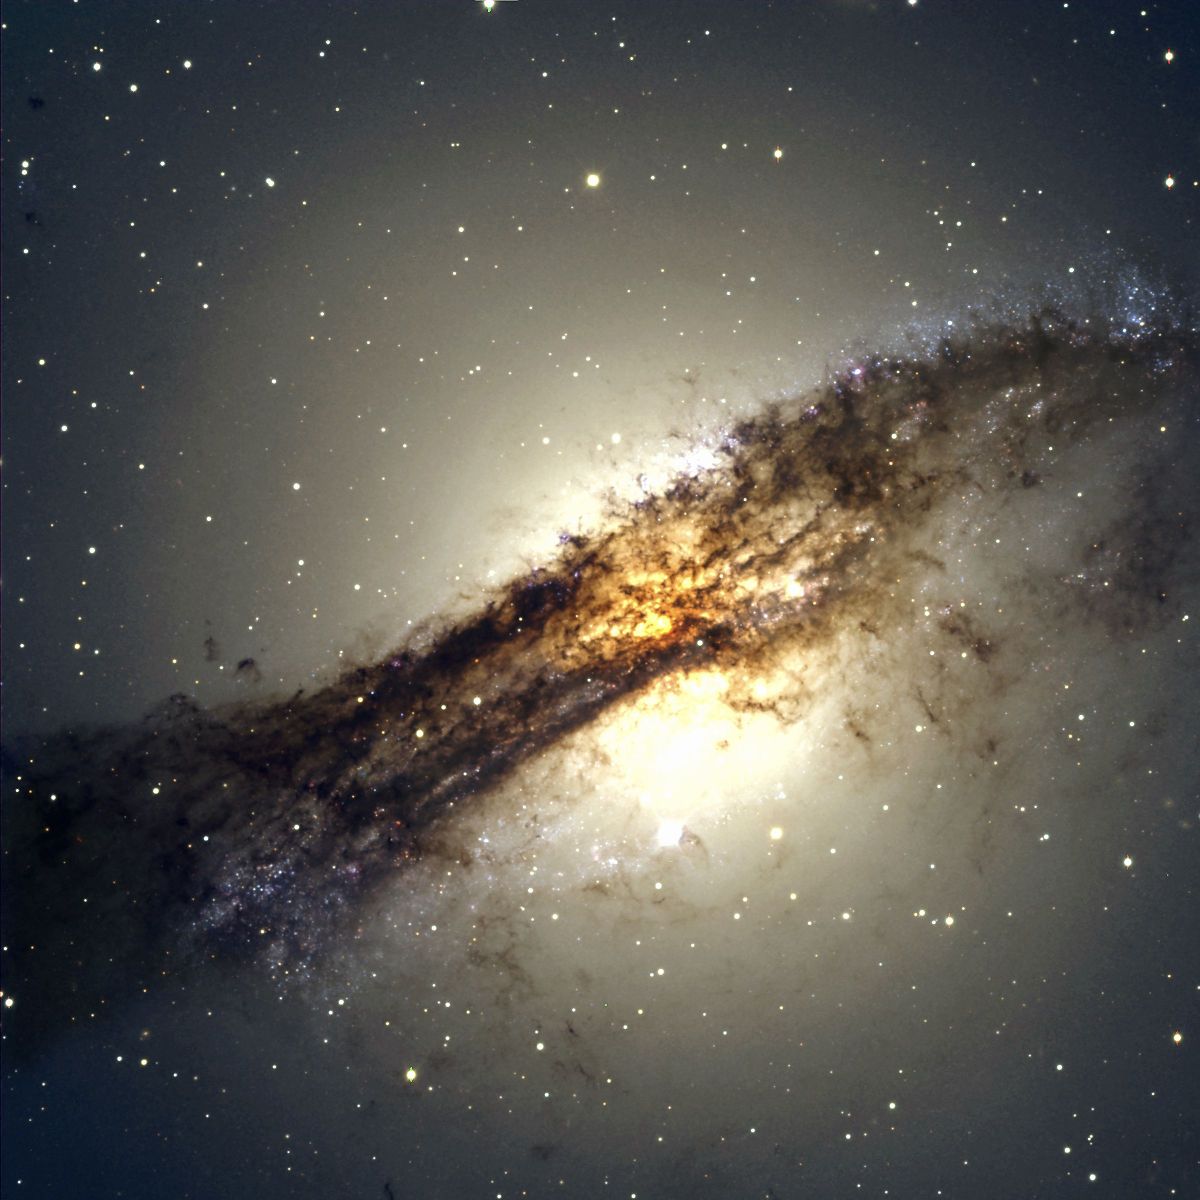 The giant elliptical galaxy Centaurus A shows a split personality because it hides a gaseous spiral at its core. When Centaurus A collided with a spiral galaxy 300 million years ago, it slurped up the spiral&#039;s gases, which formed a new spiral inside the larger galaxy.